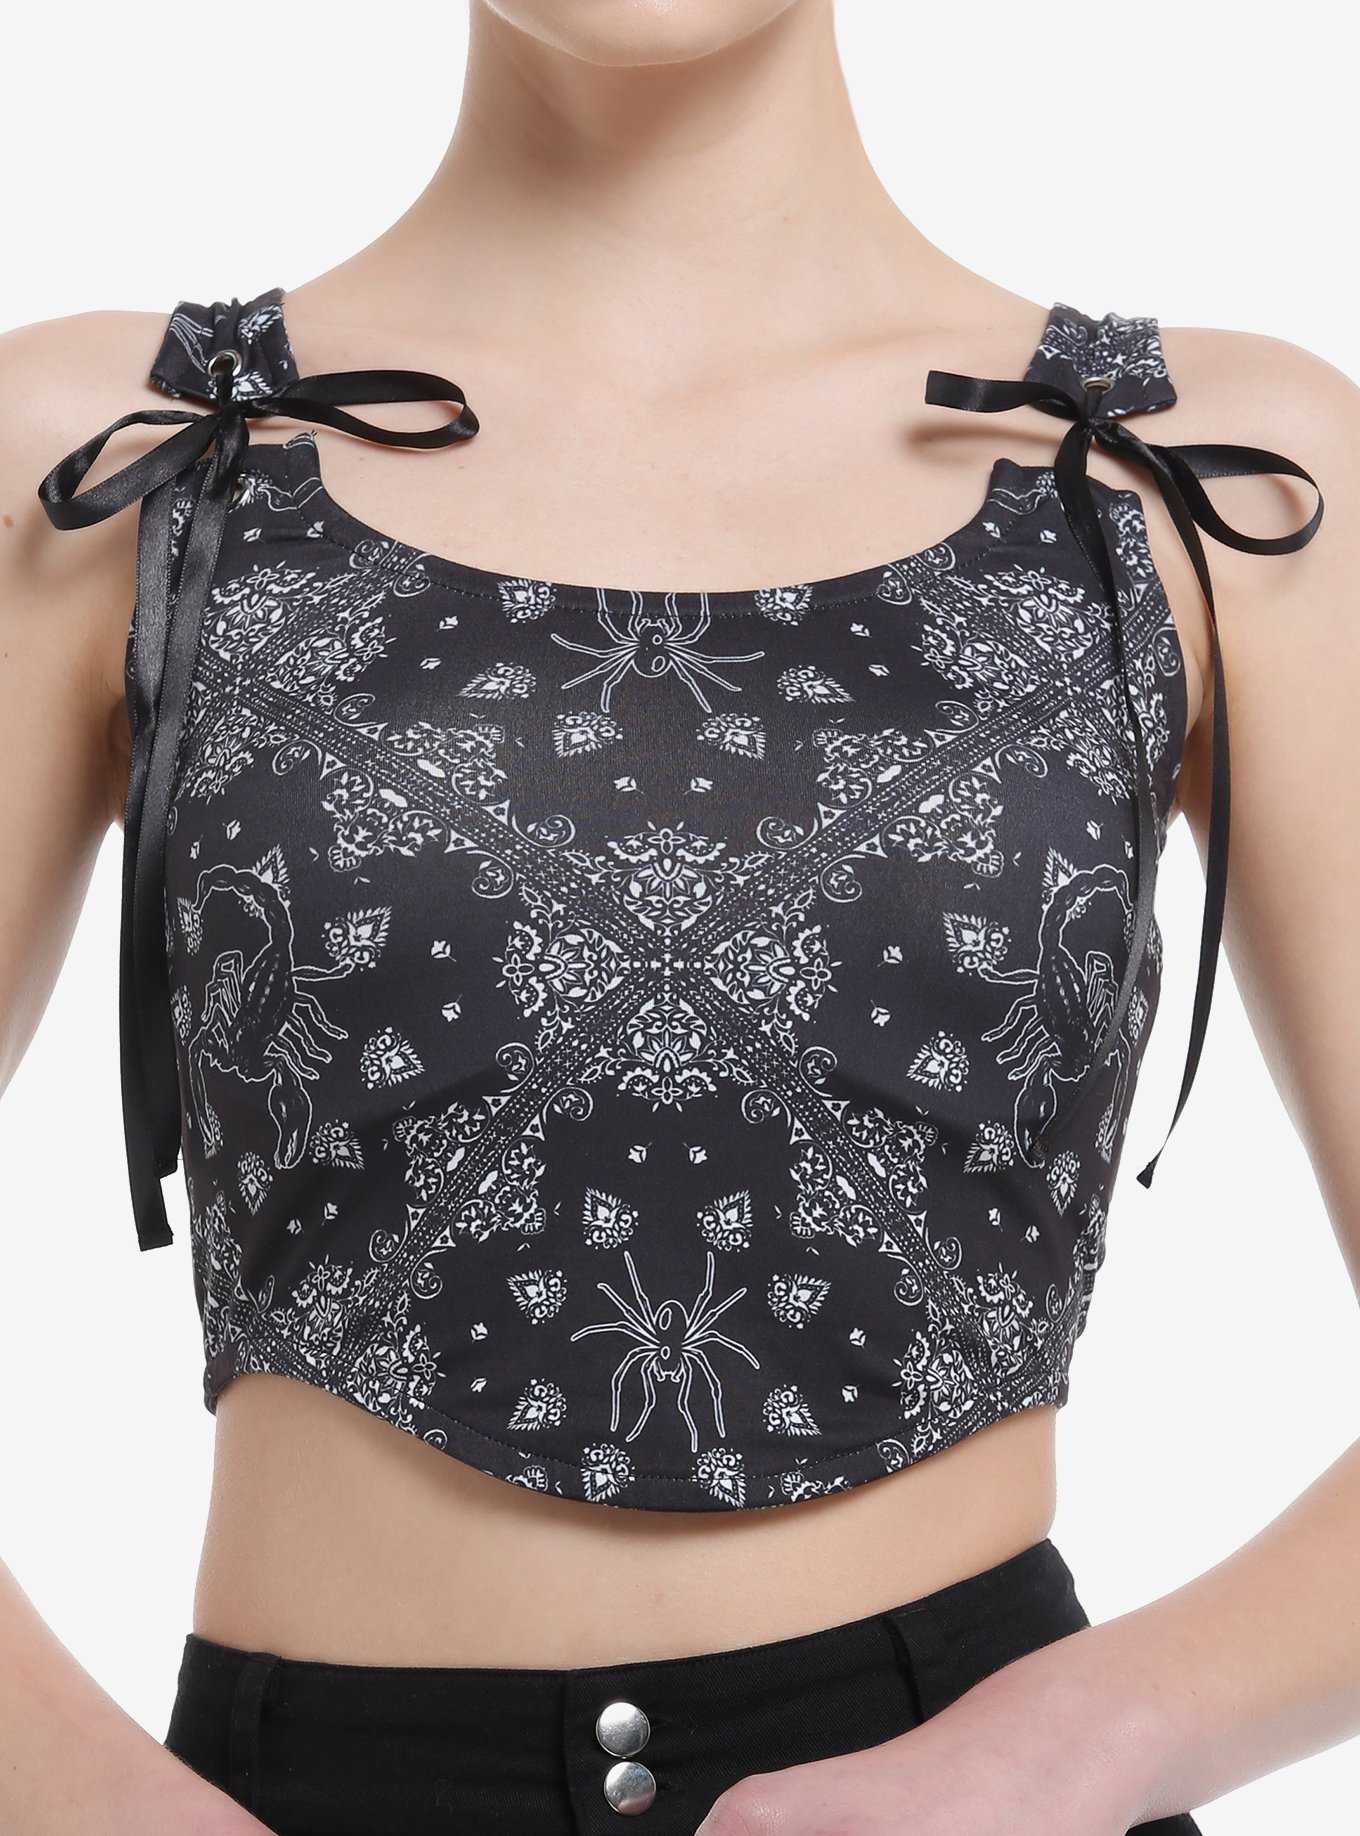 Get the top for $59 at urbanoutfitters.com - Wheretoget  Black lace corset  top, Bustier top outfits, Black corset top